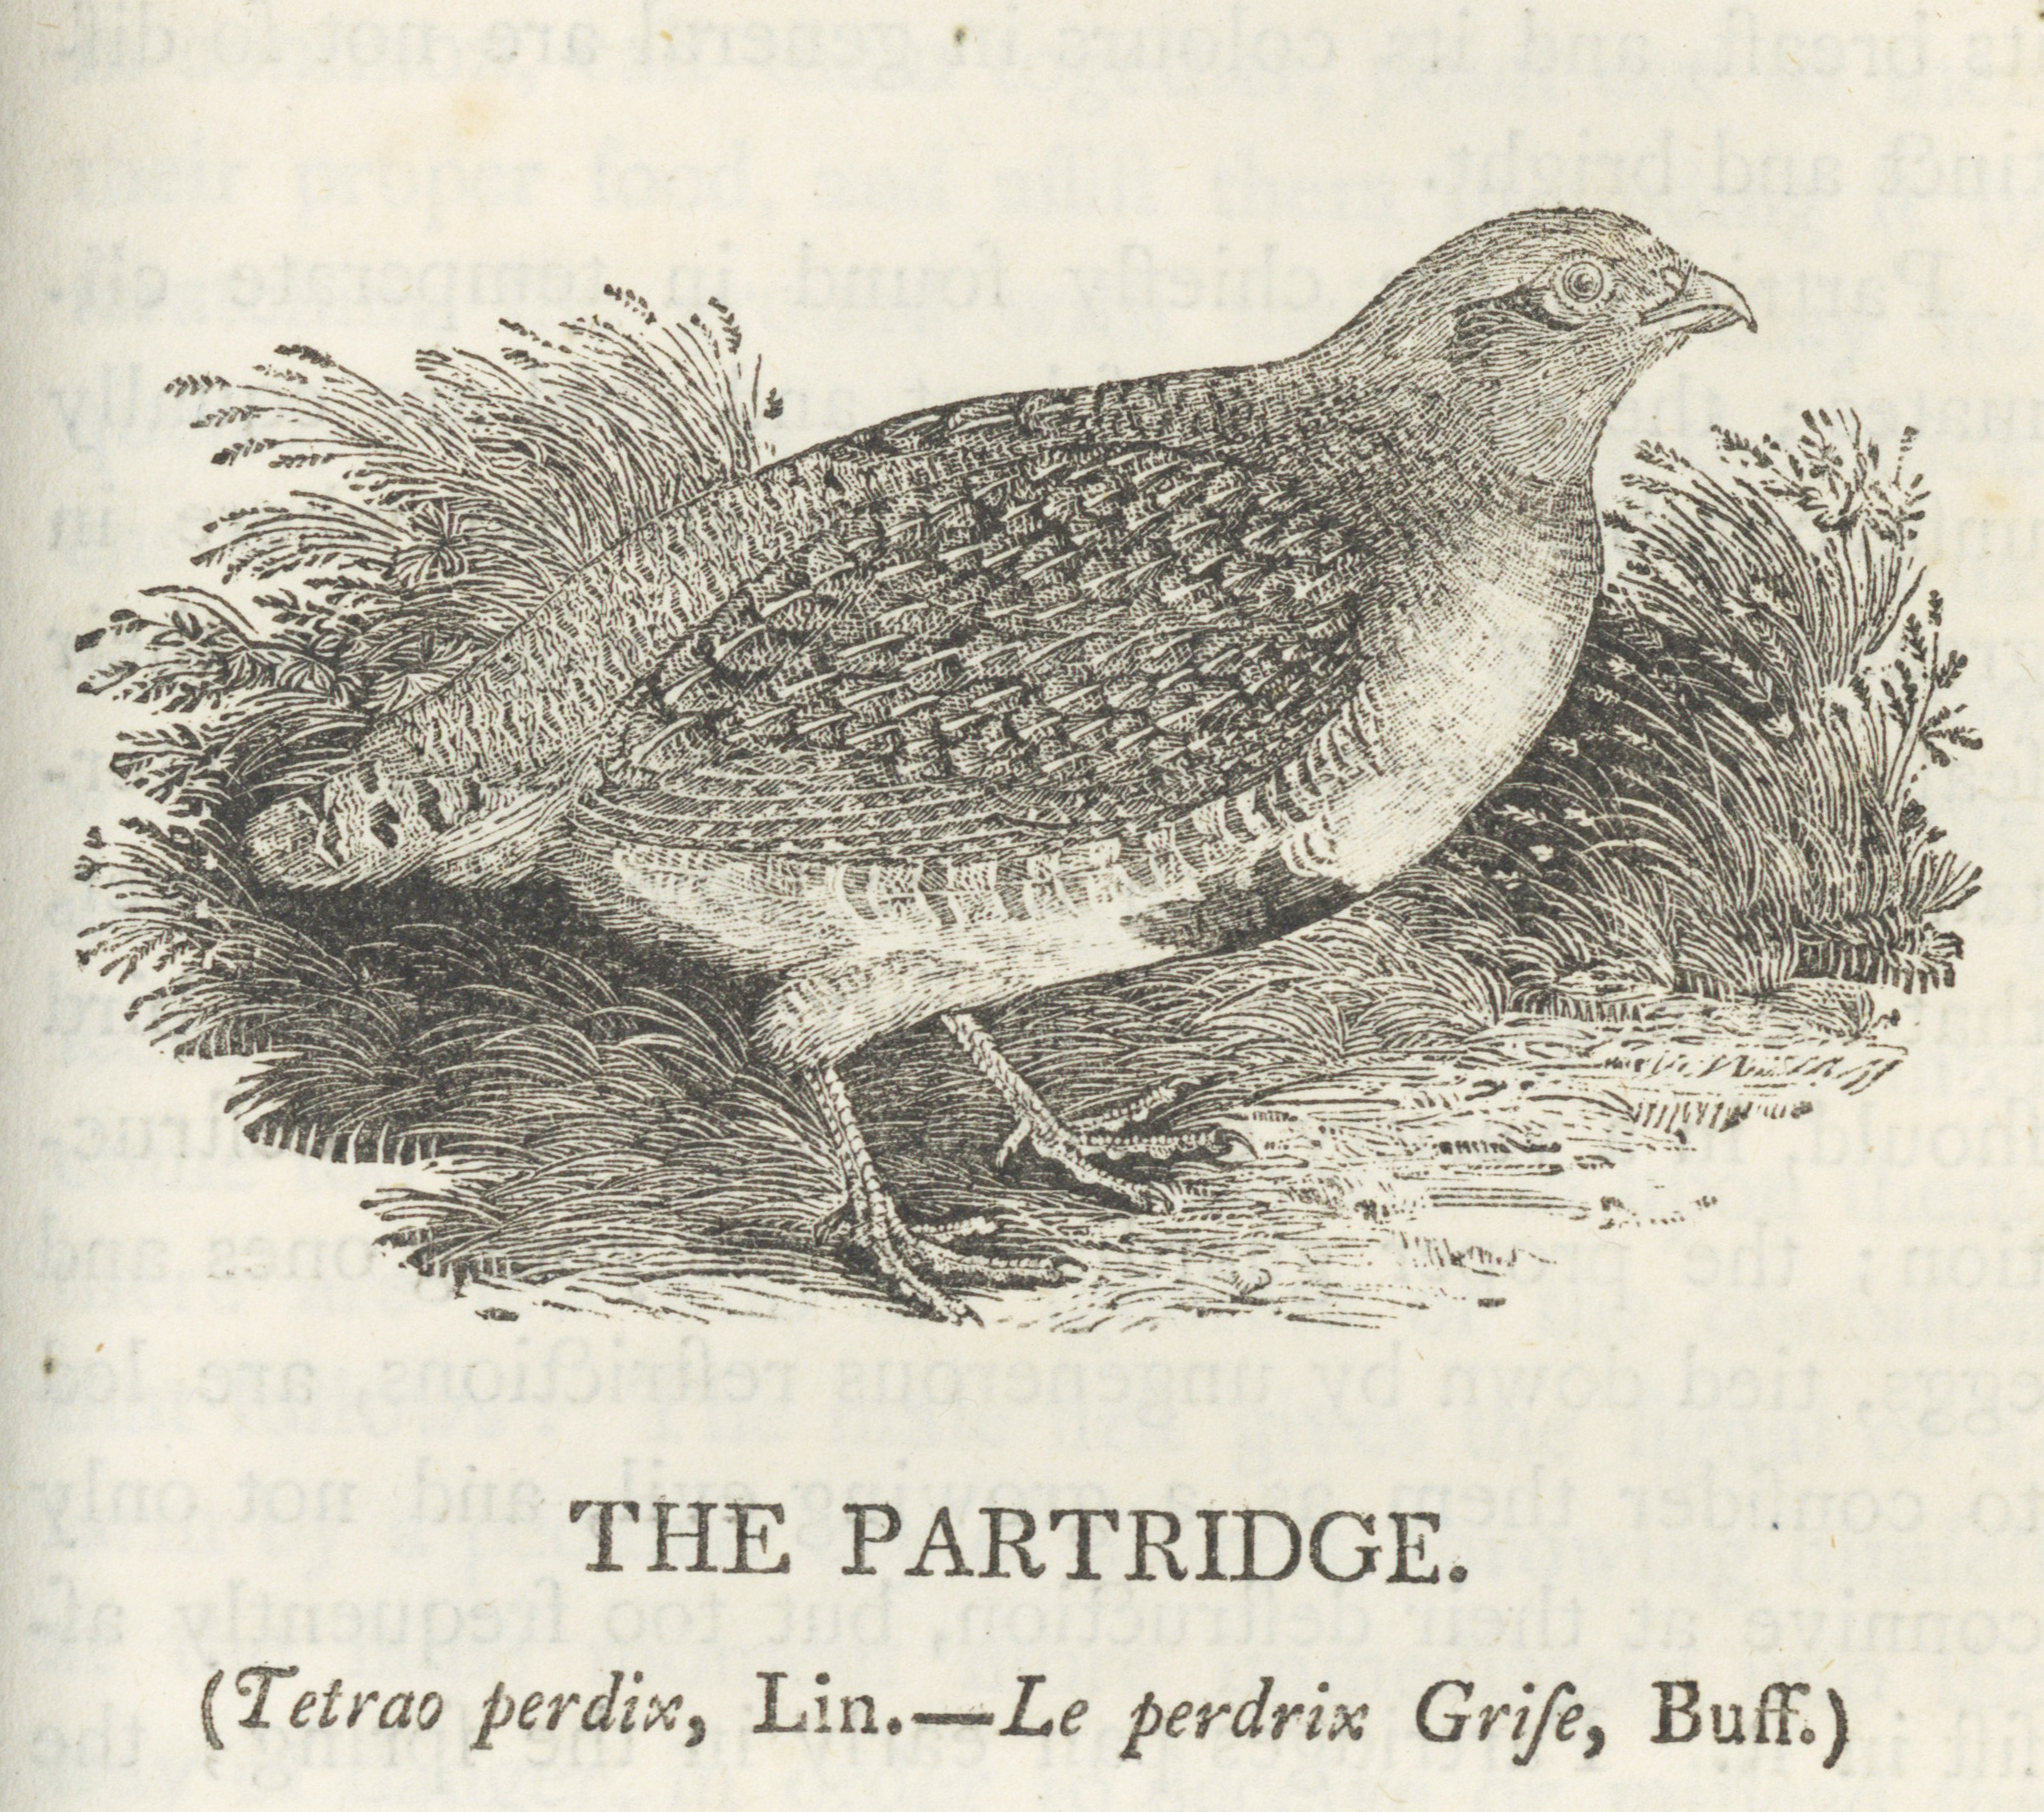 Illustration of a partridge